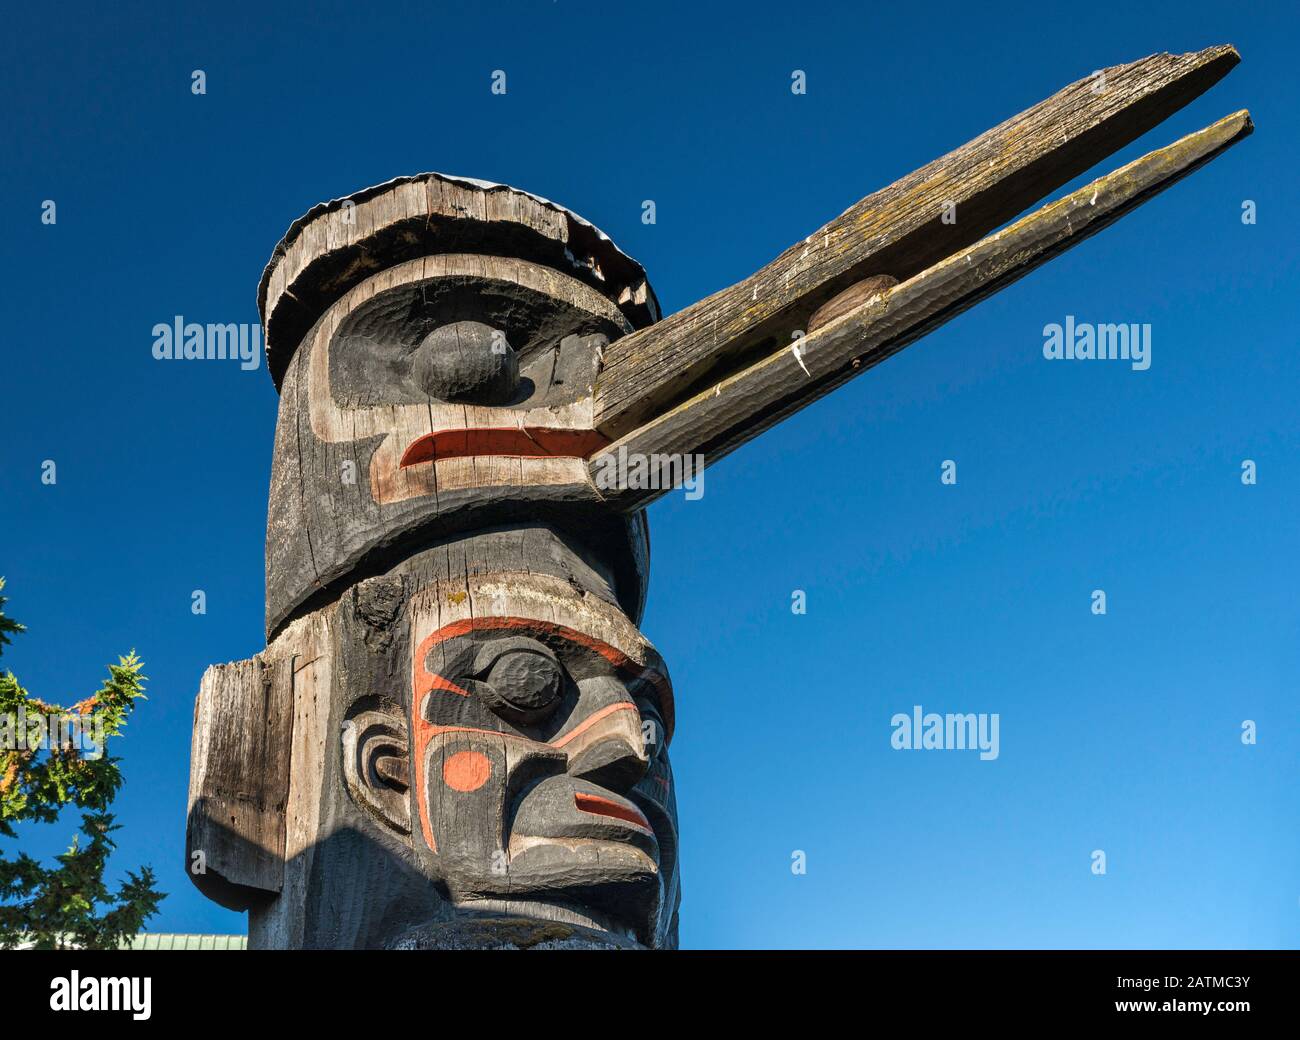 Huxwhukw, a mythical bird on top of totem pole at Thunderbird Park, Victoria, Vancouver Island, British Columbia, Canada Stock Photo